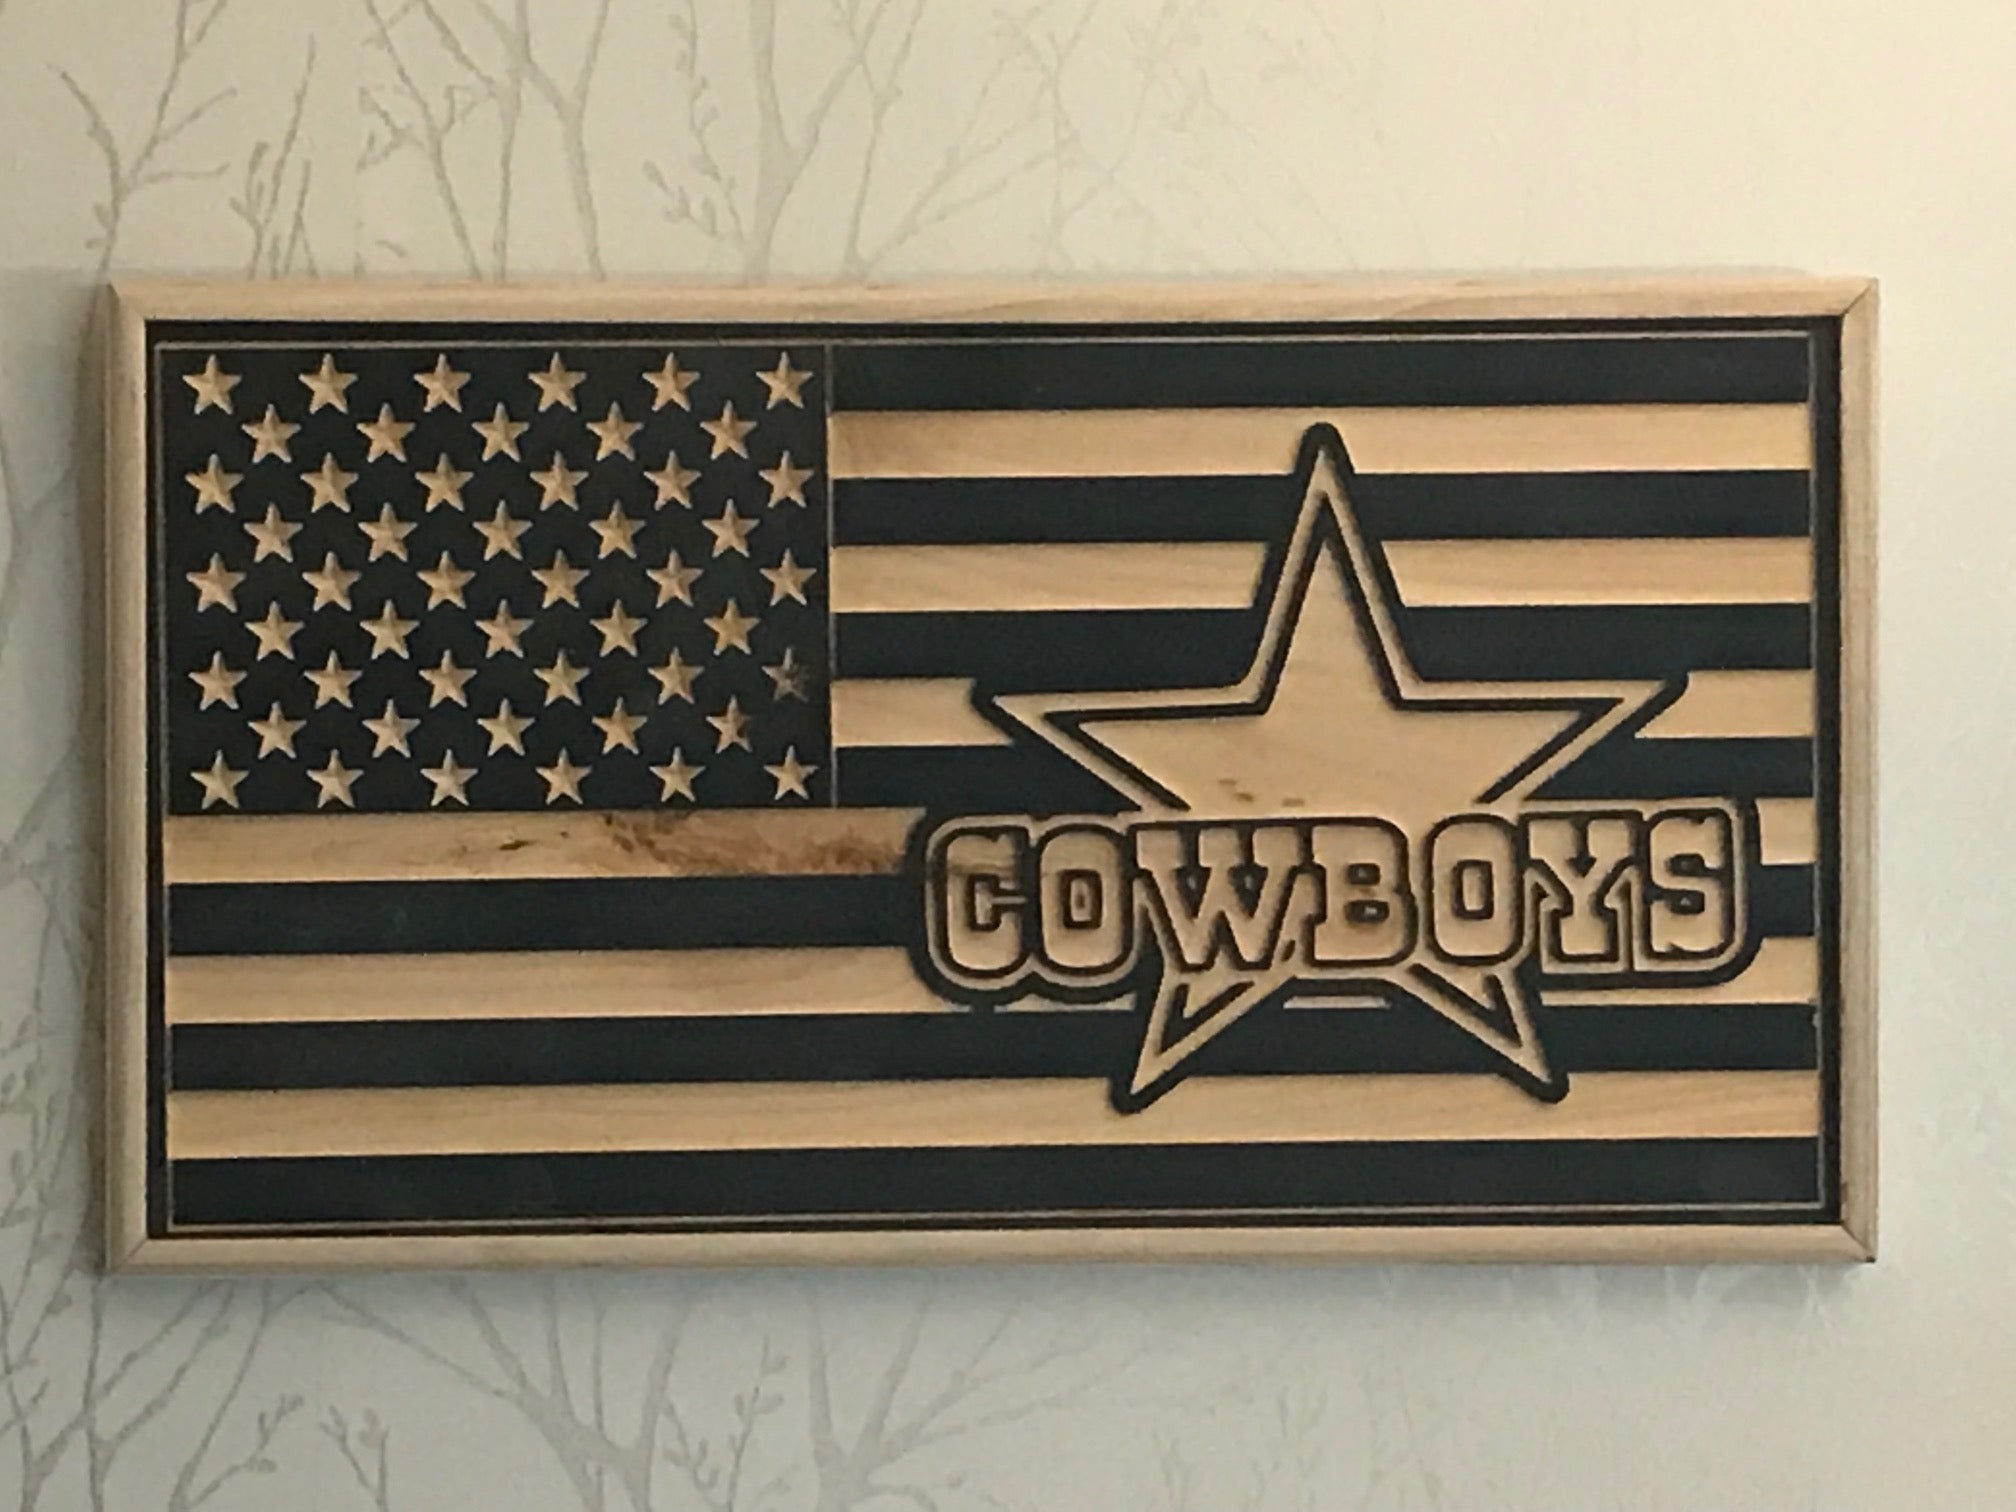 USA Flag with Cowboys logo carved in wood